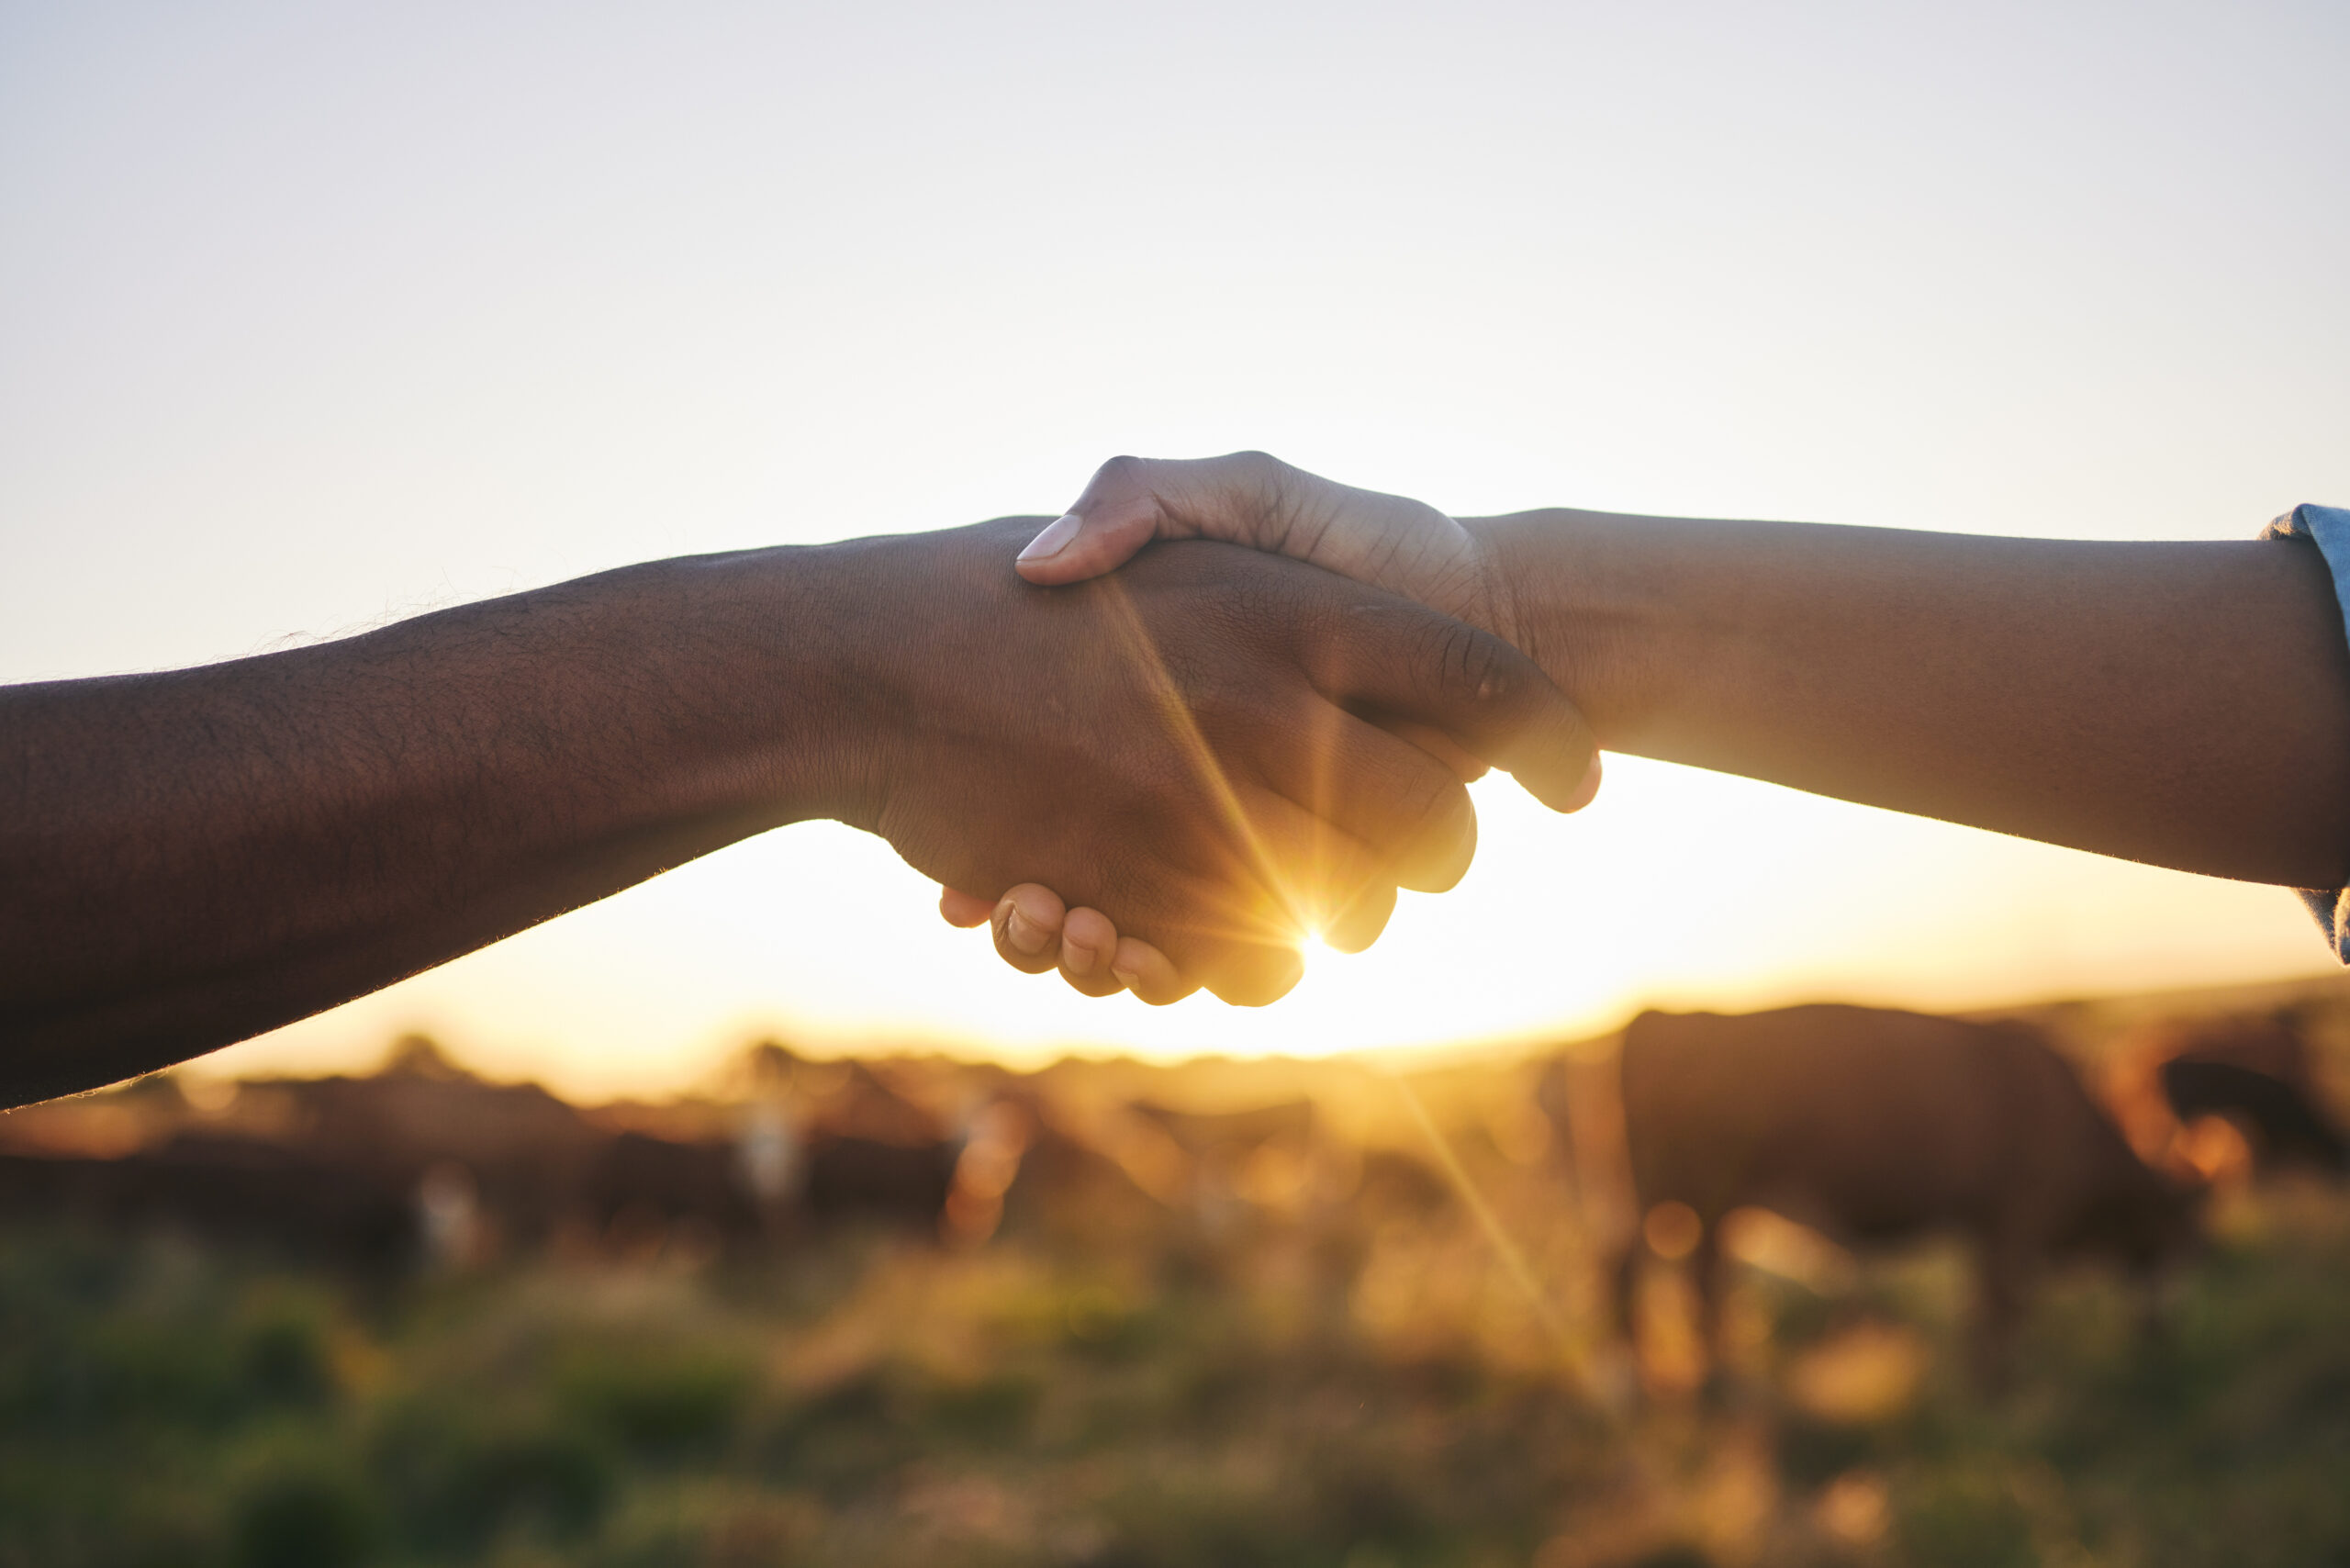 Welcome, handshake and people with b2b farm deal for agriculture, partnership or small business support. Thank you, shaking hands and farming collaboration for supply chain, trust and agro startup.